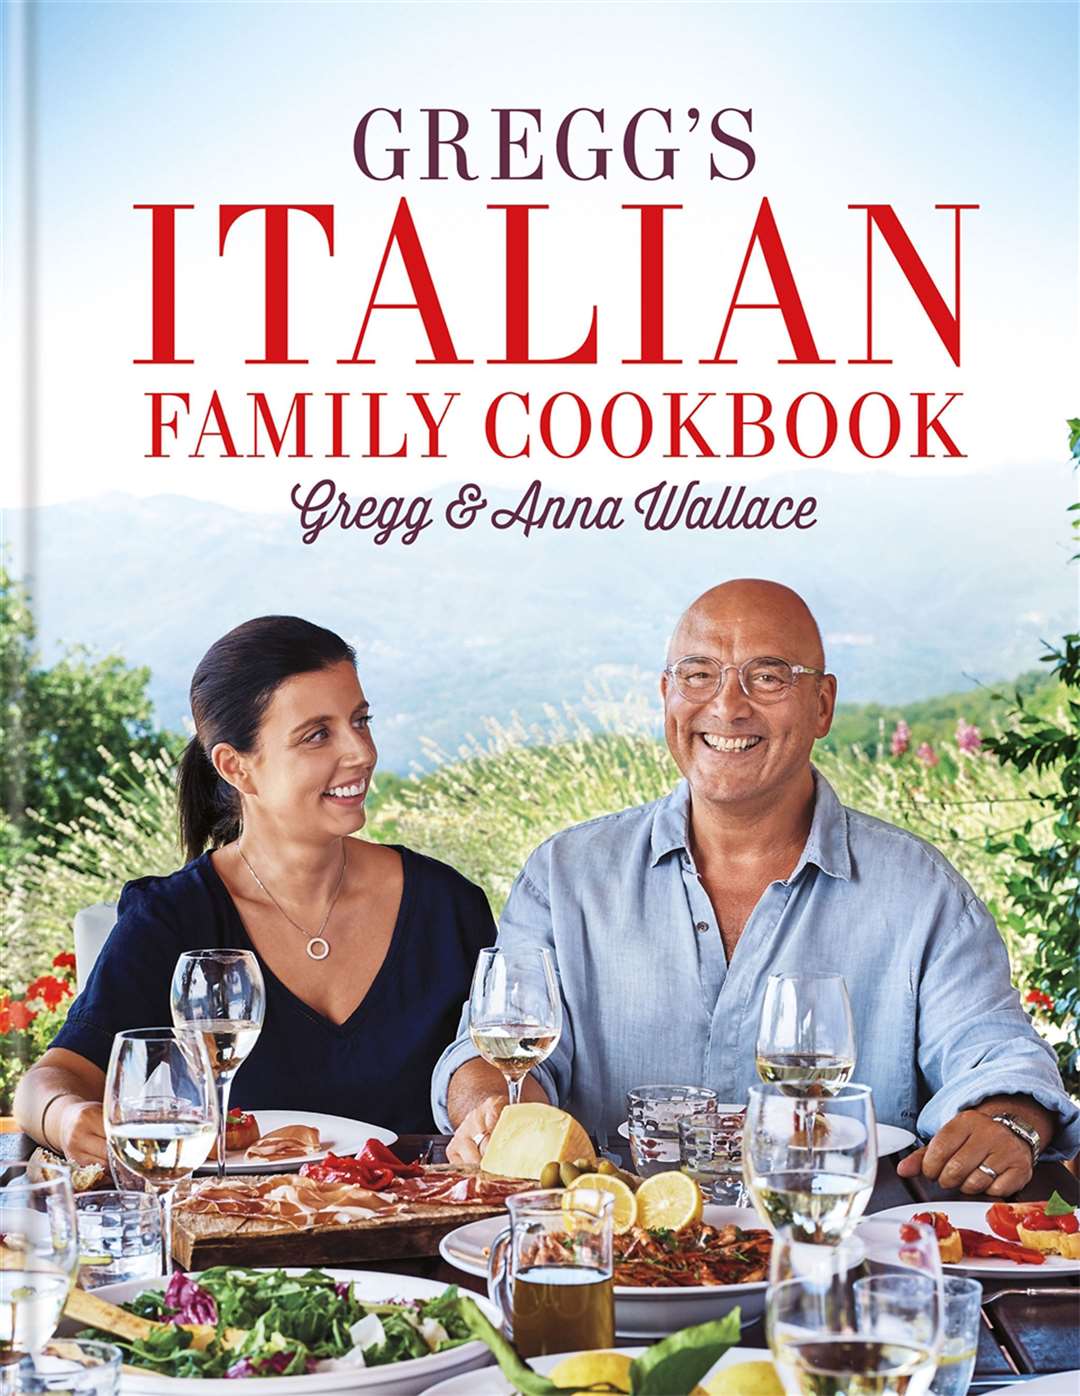 Gregg's Italian Family Cookbook by Gregg & Anna Wallace is published by Mitchell Beazley, priced £20. Available now (octopusbooks.co.uk).